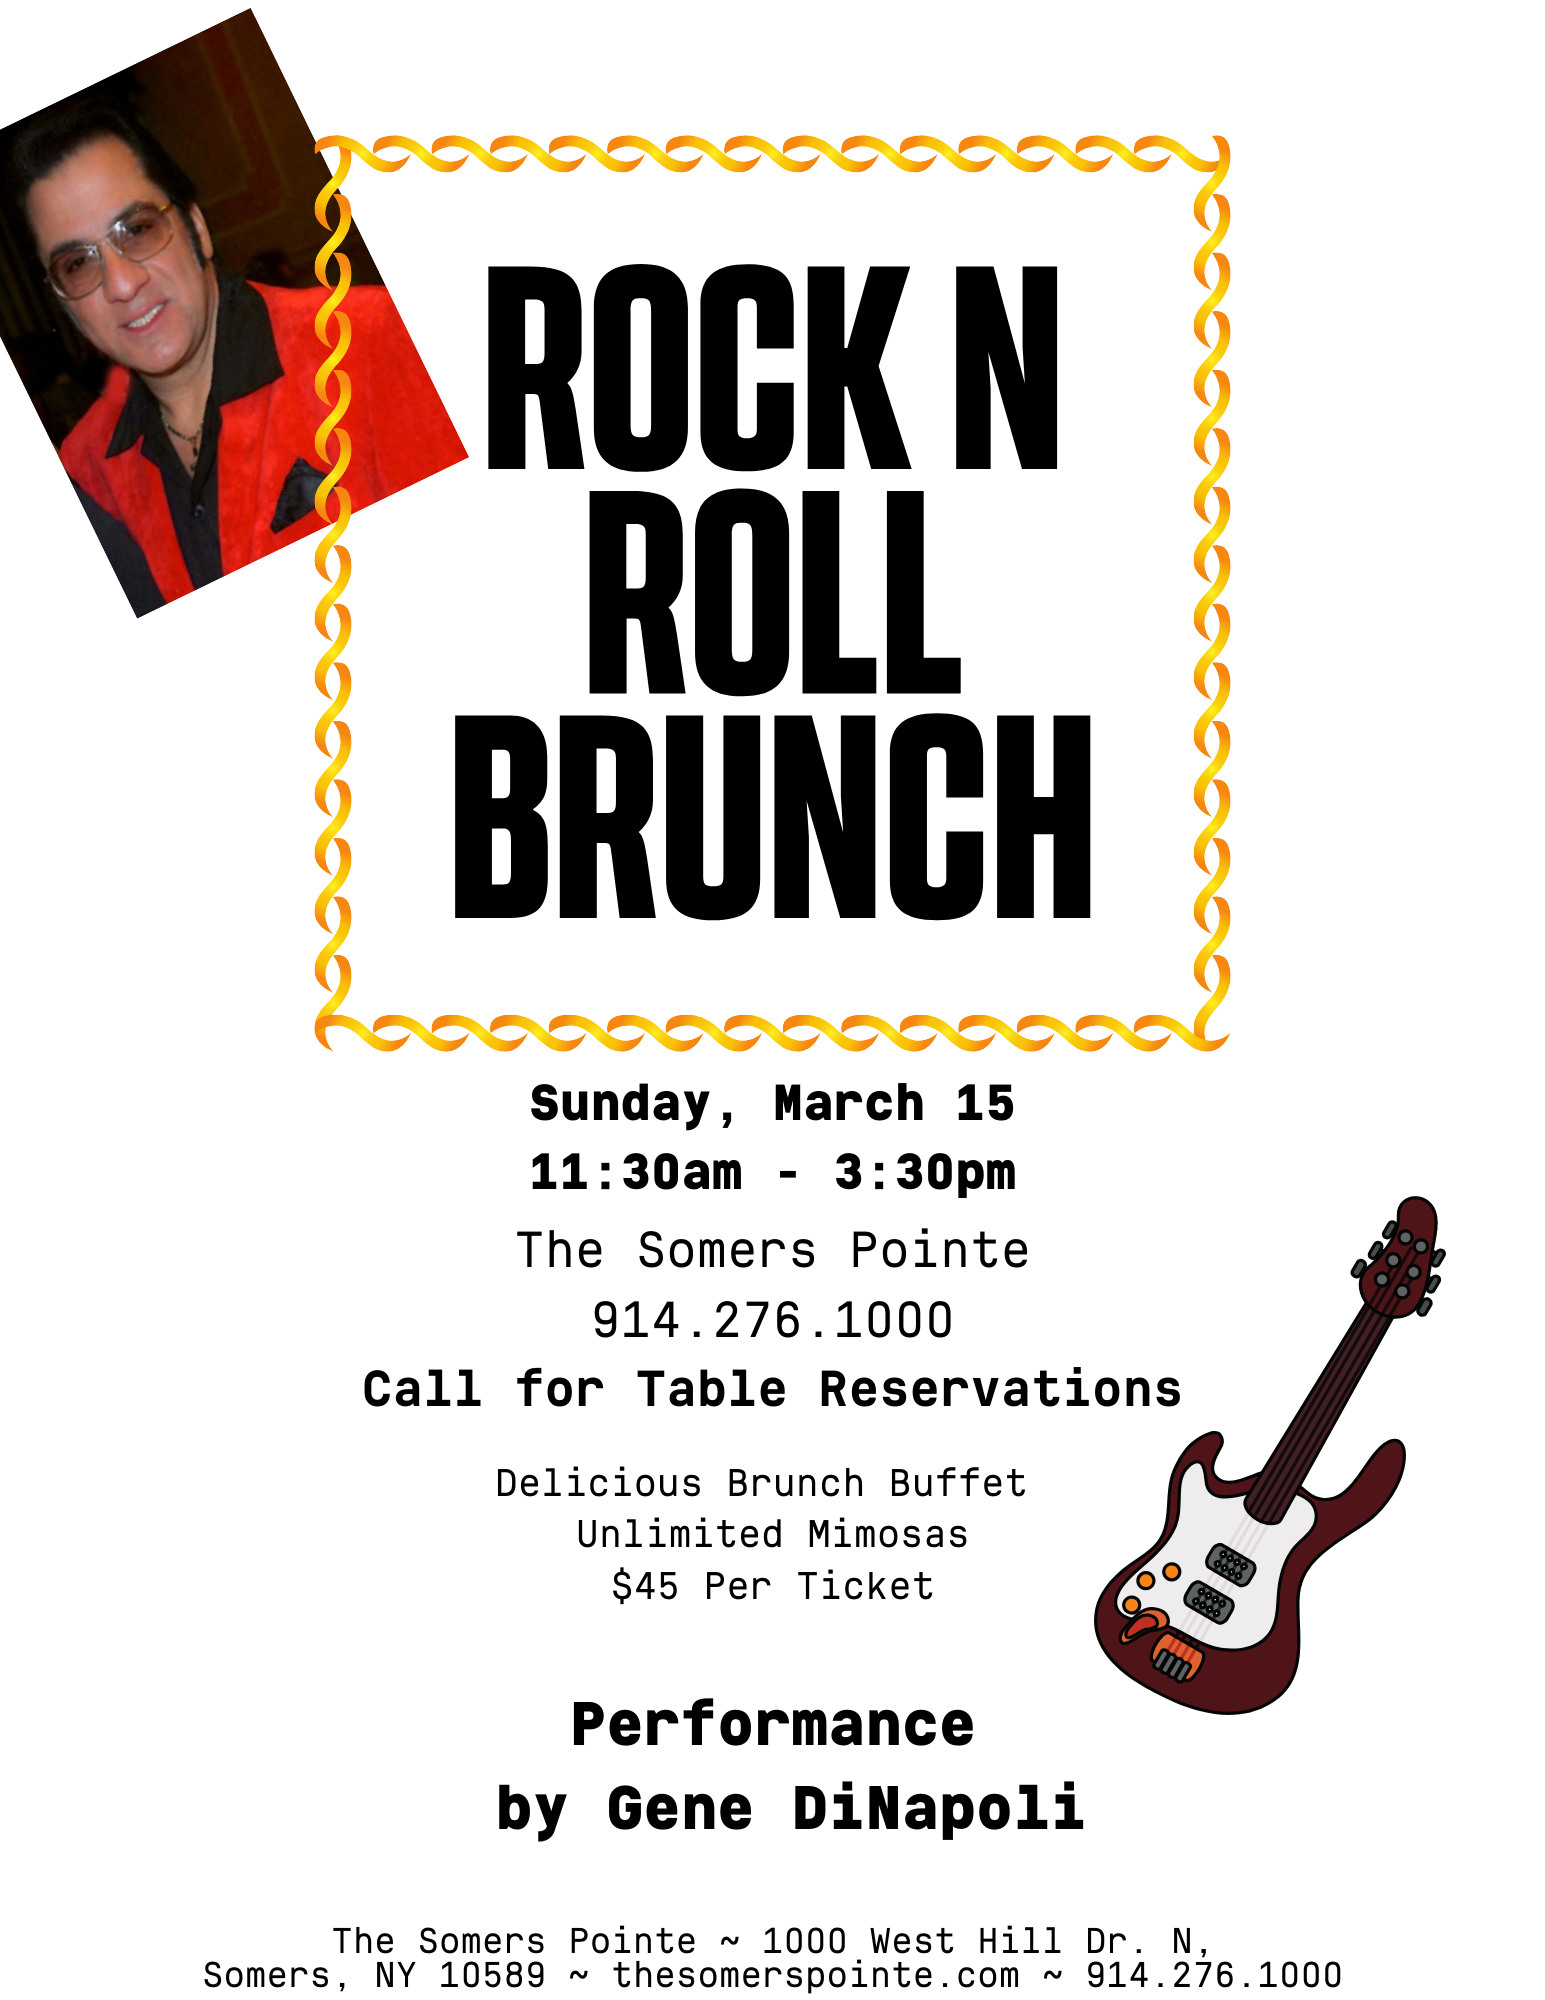 Rock N Roll Brunch Feat. Gene DiNapoli at The Somers Pointe & The Grille at Somers Pointe